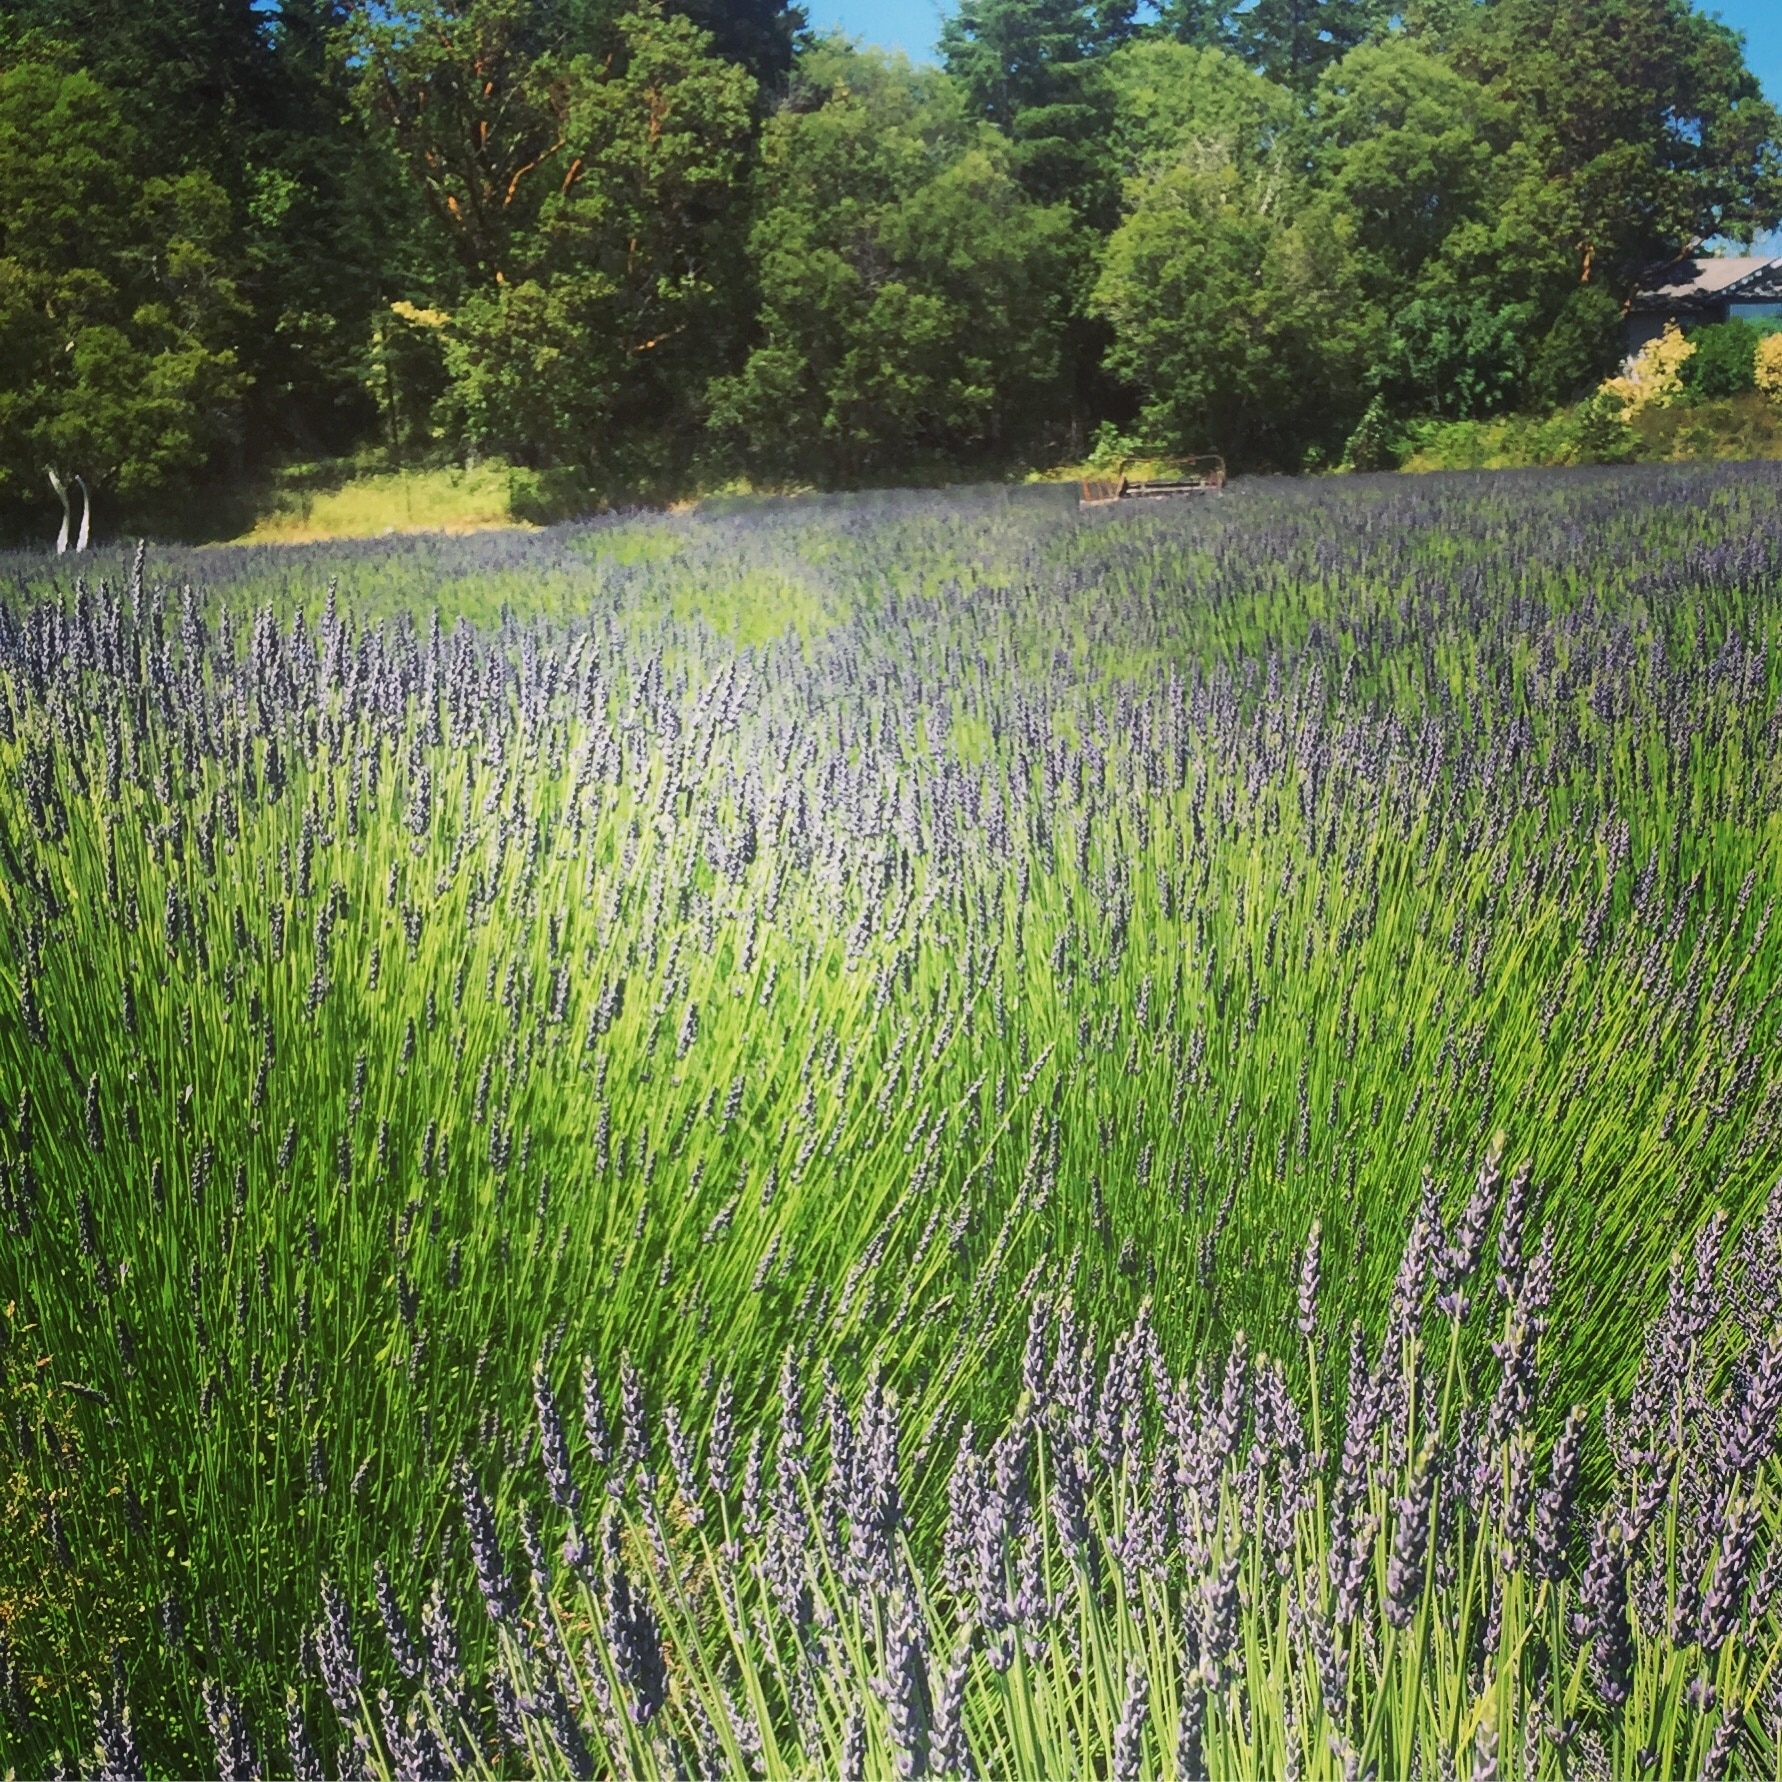 Not all Lavender is reserved for Sequim!